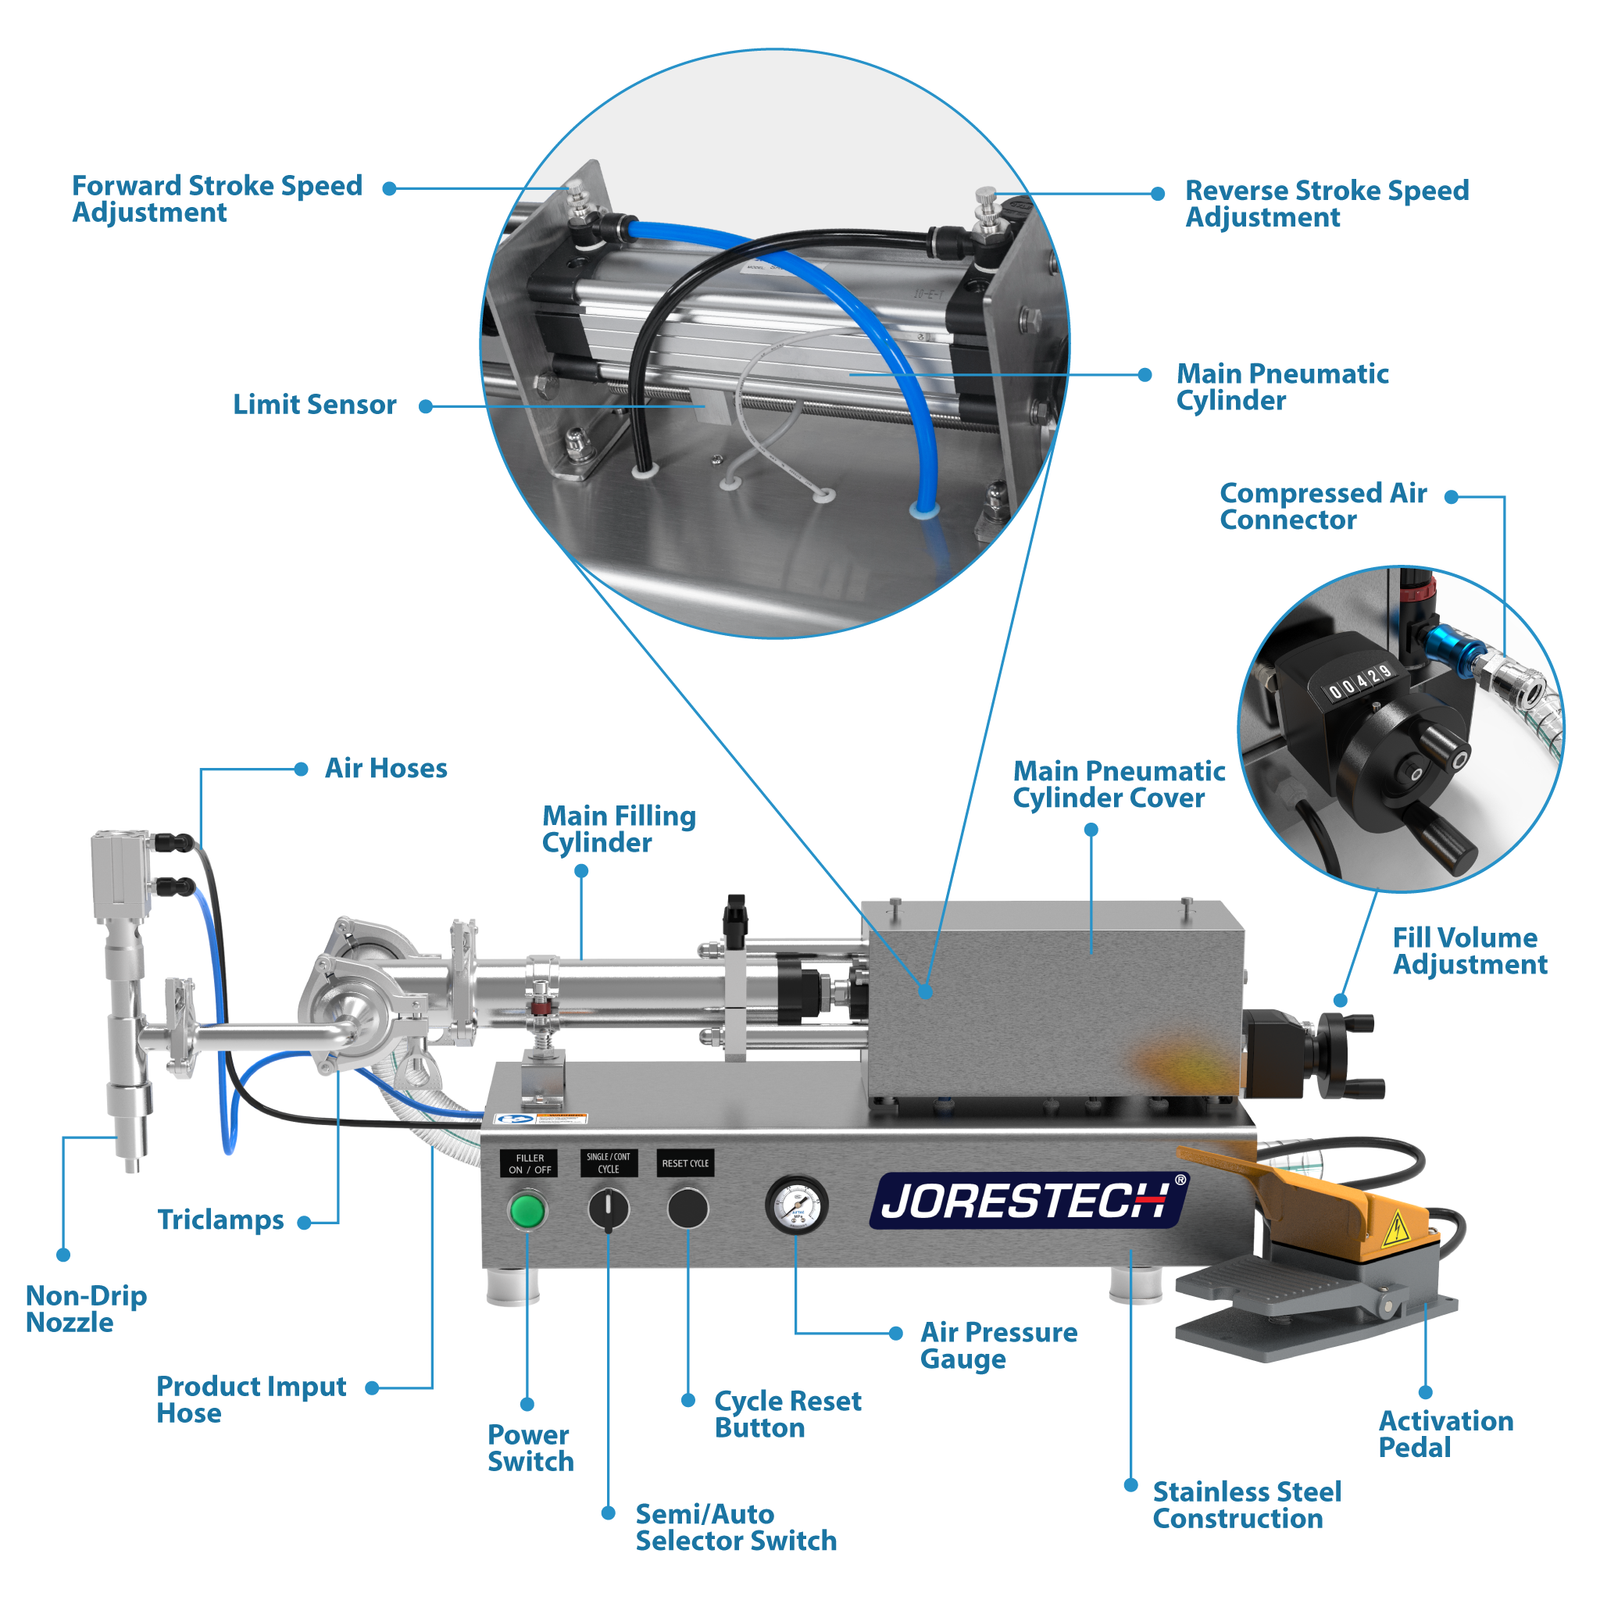 Infographic of the Low viscosity table top Liquid Piston Filler. Call-outs are signaling the different parts of the machine. Two of the main parts mentioned are the Main Pneumatic Cylinder and the Fill Volume Adjuster